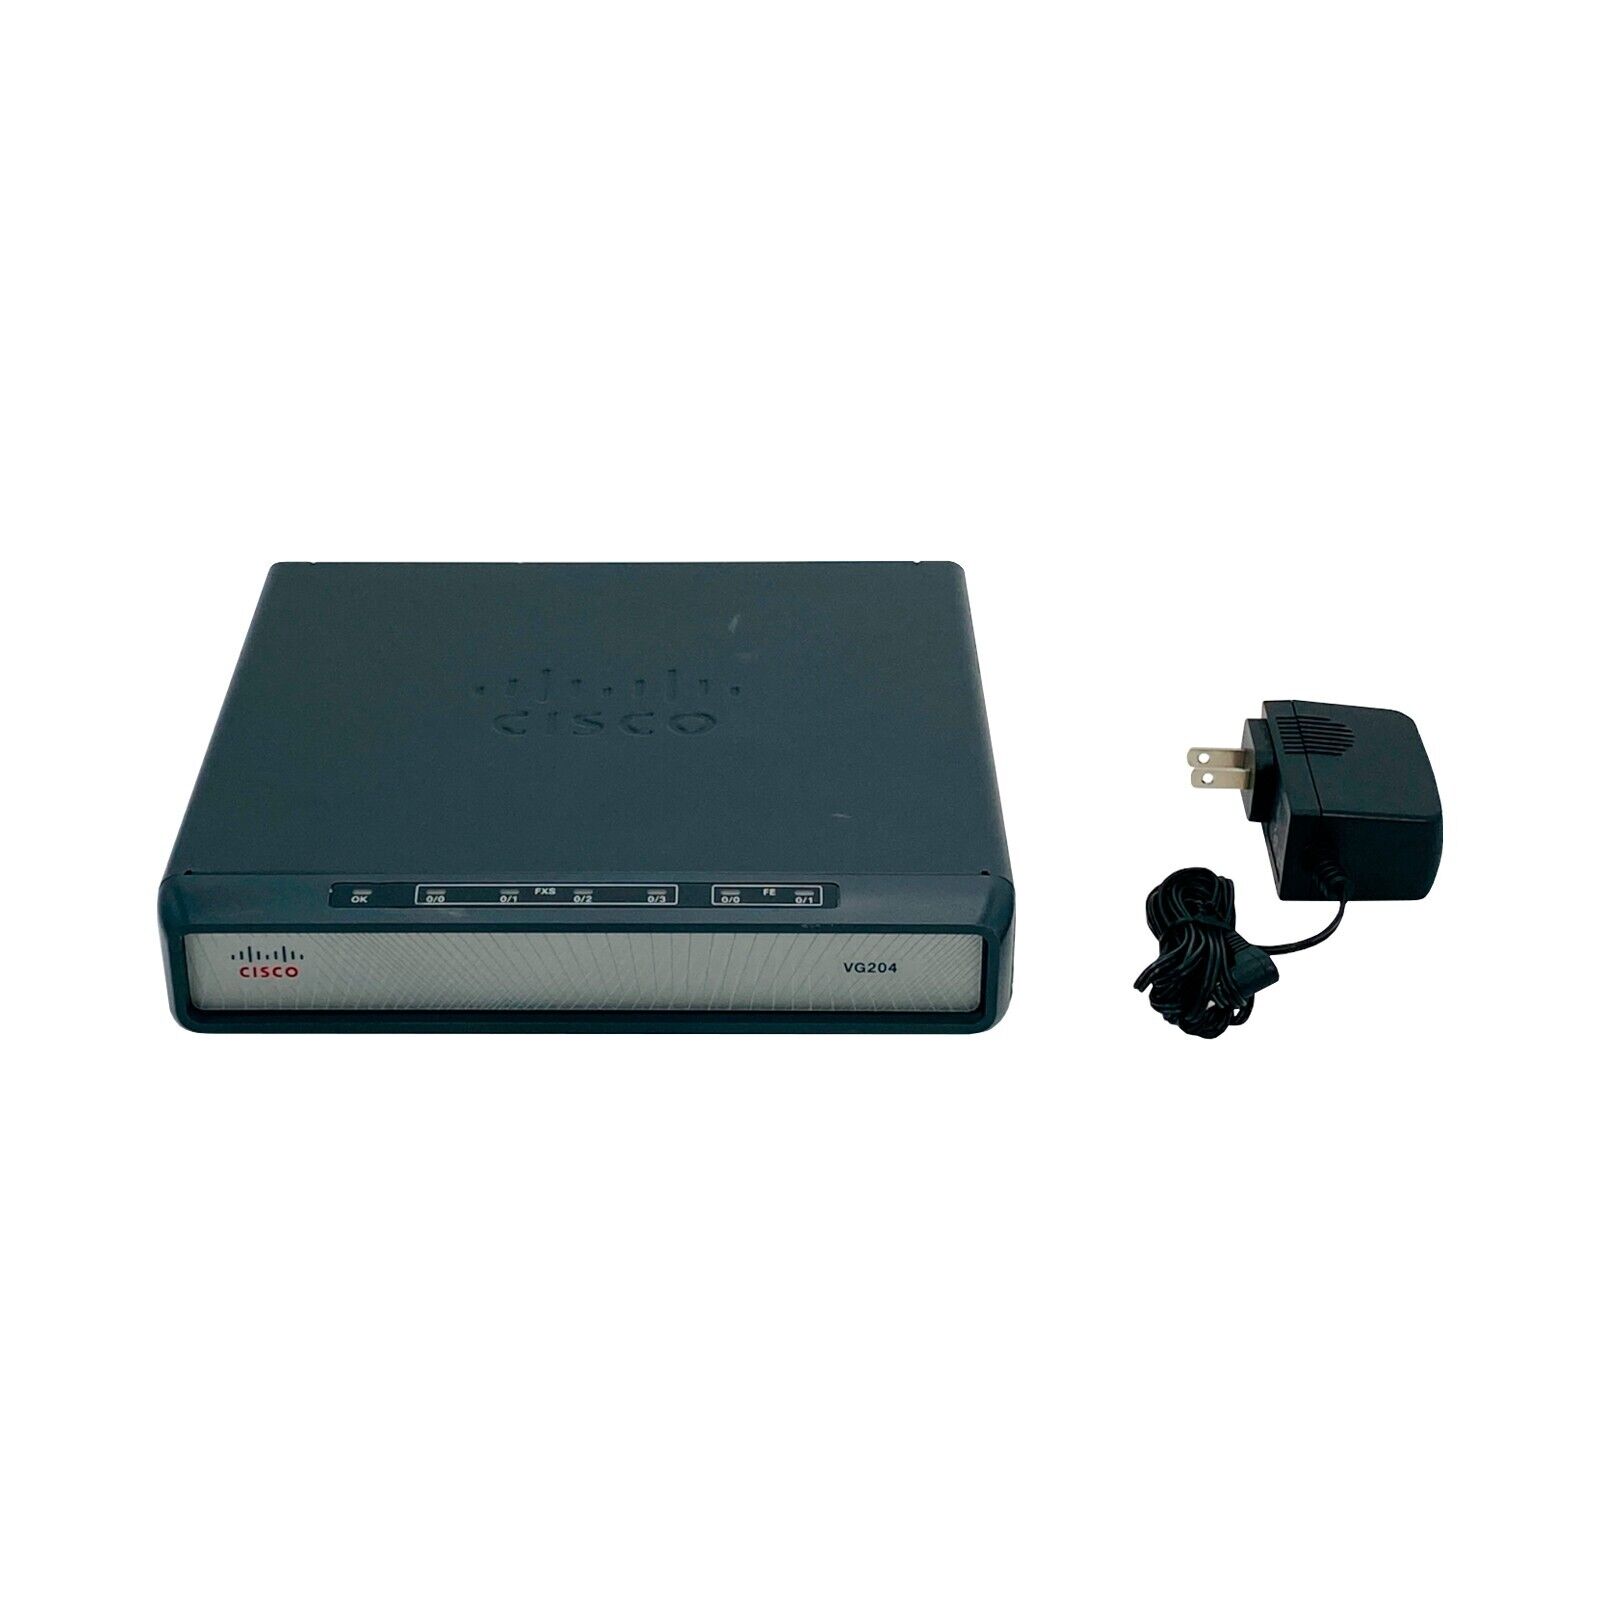 Cisco VG204 4-Port Analog Voice Phone Gateway with AC Adapter